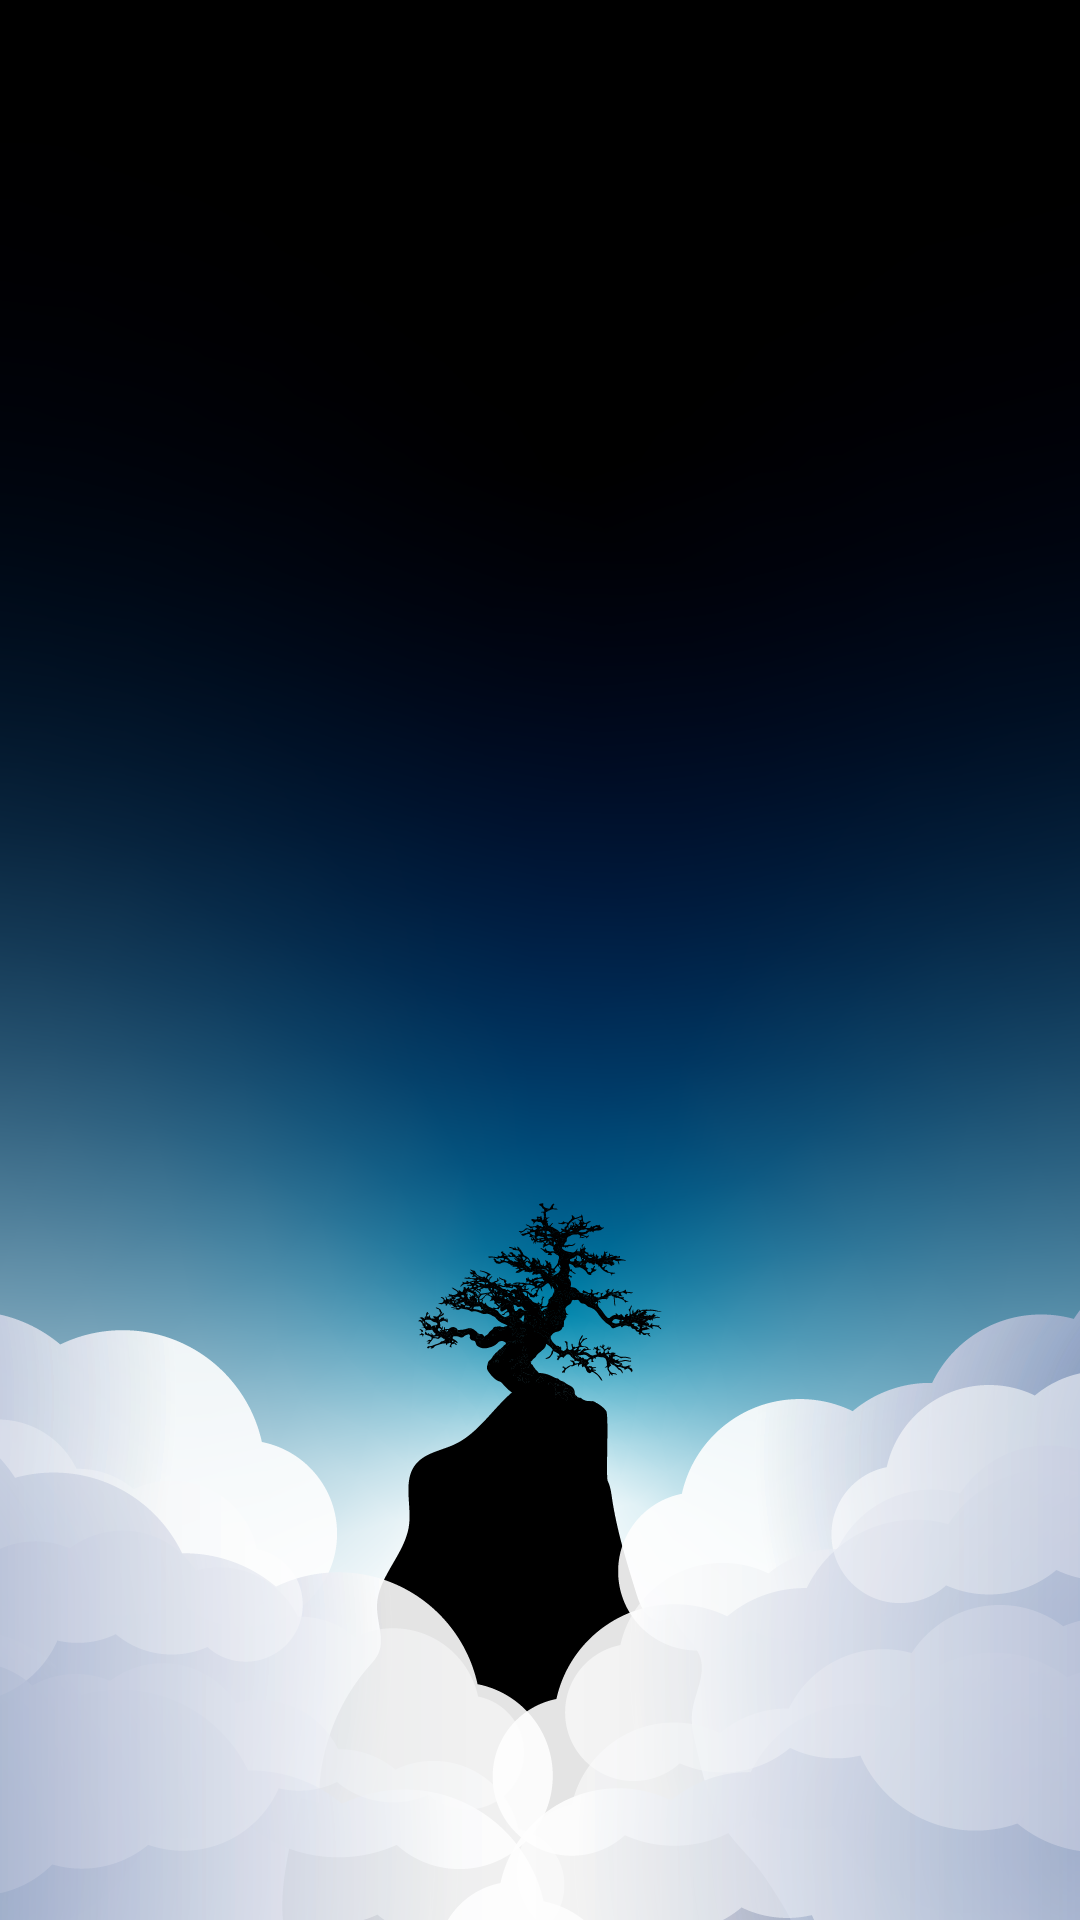 iPhone wallpaper HD 4K in the clouds